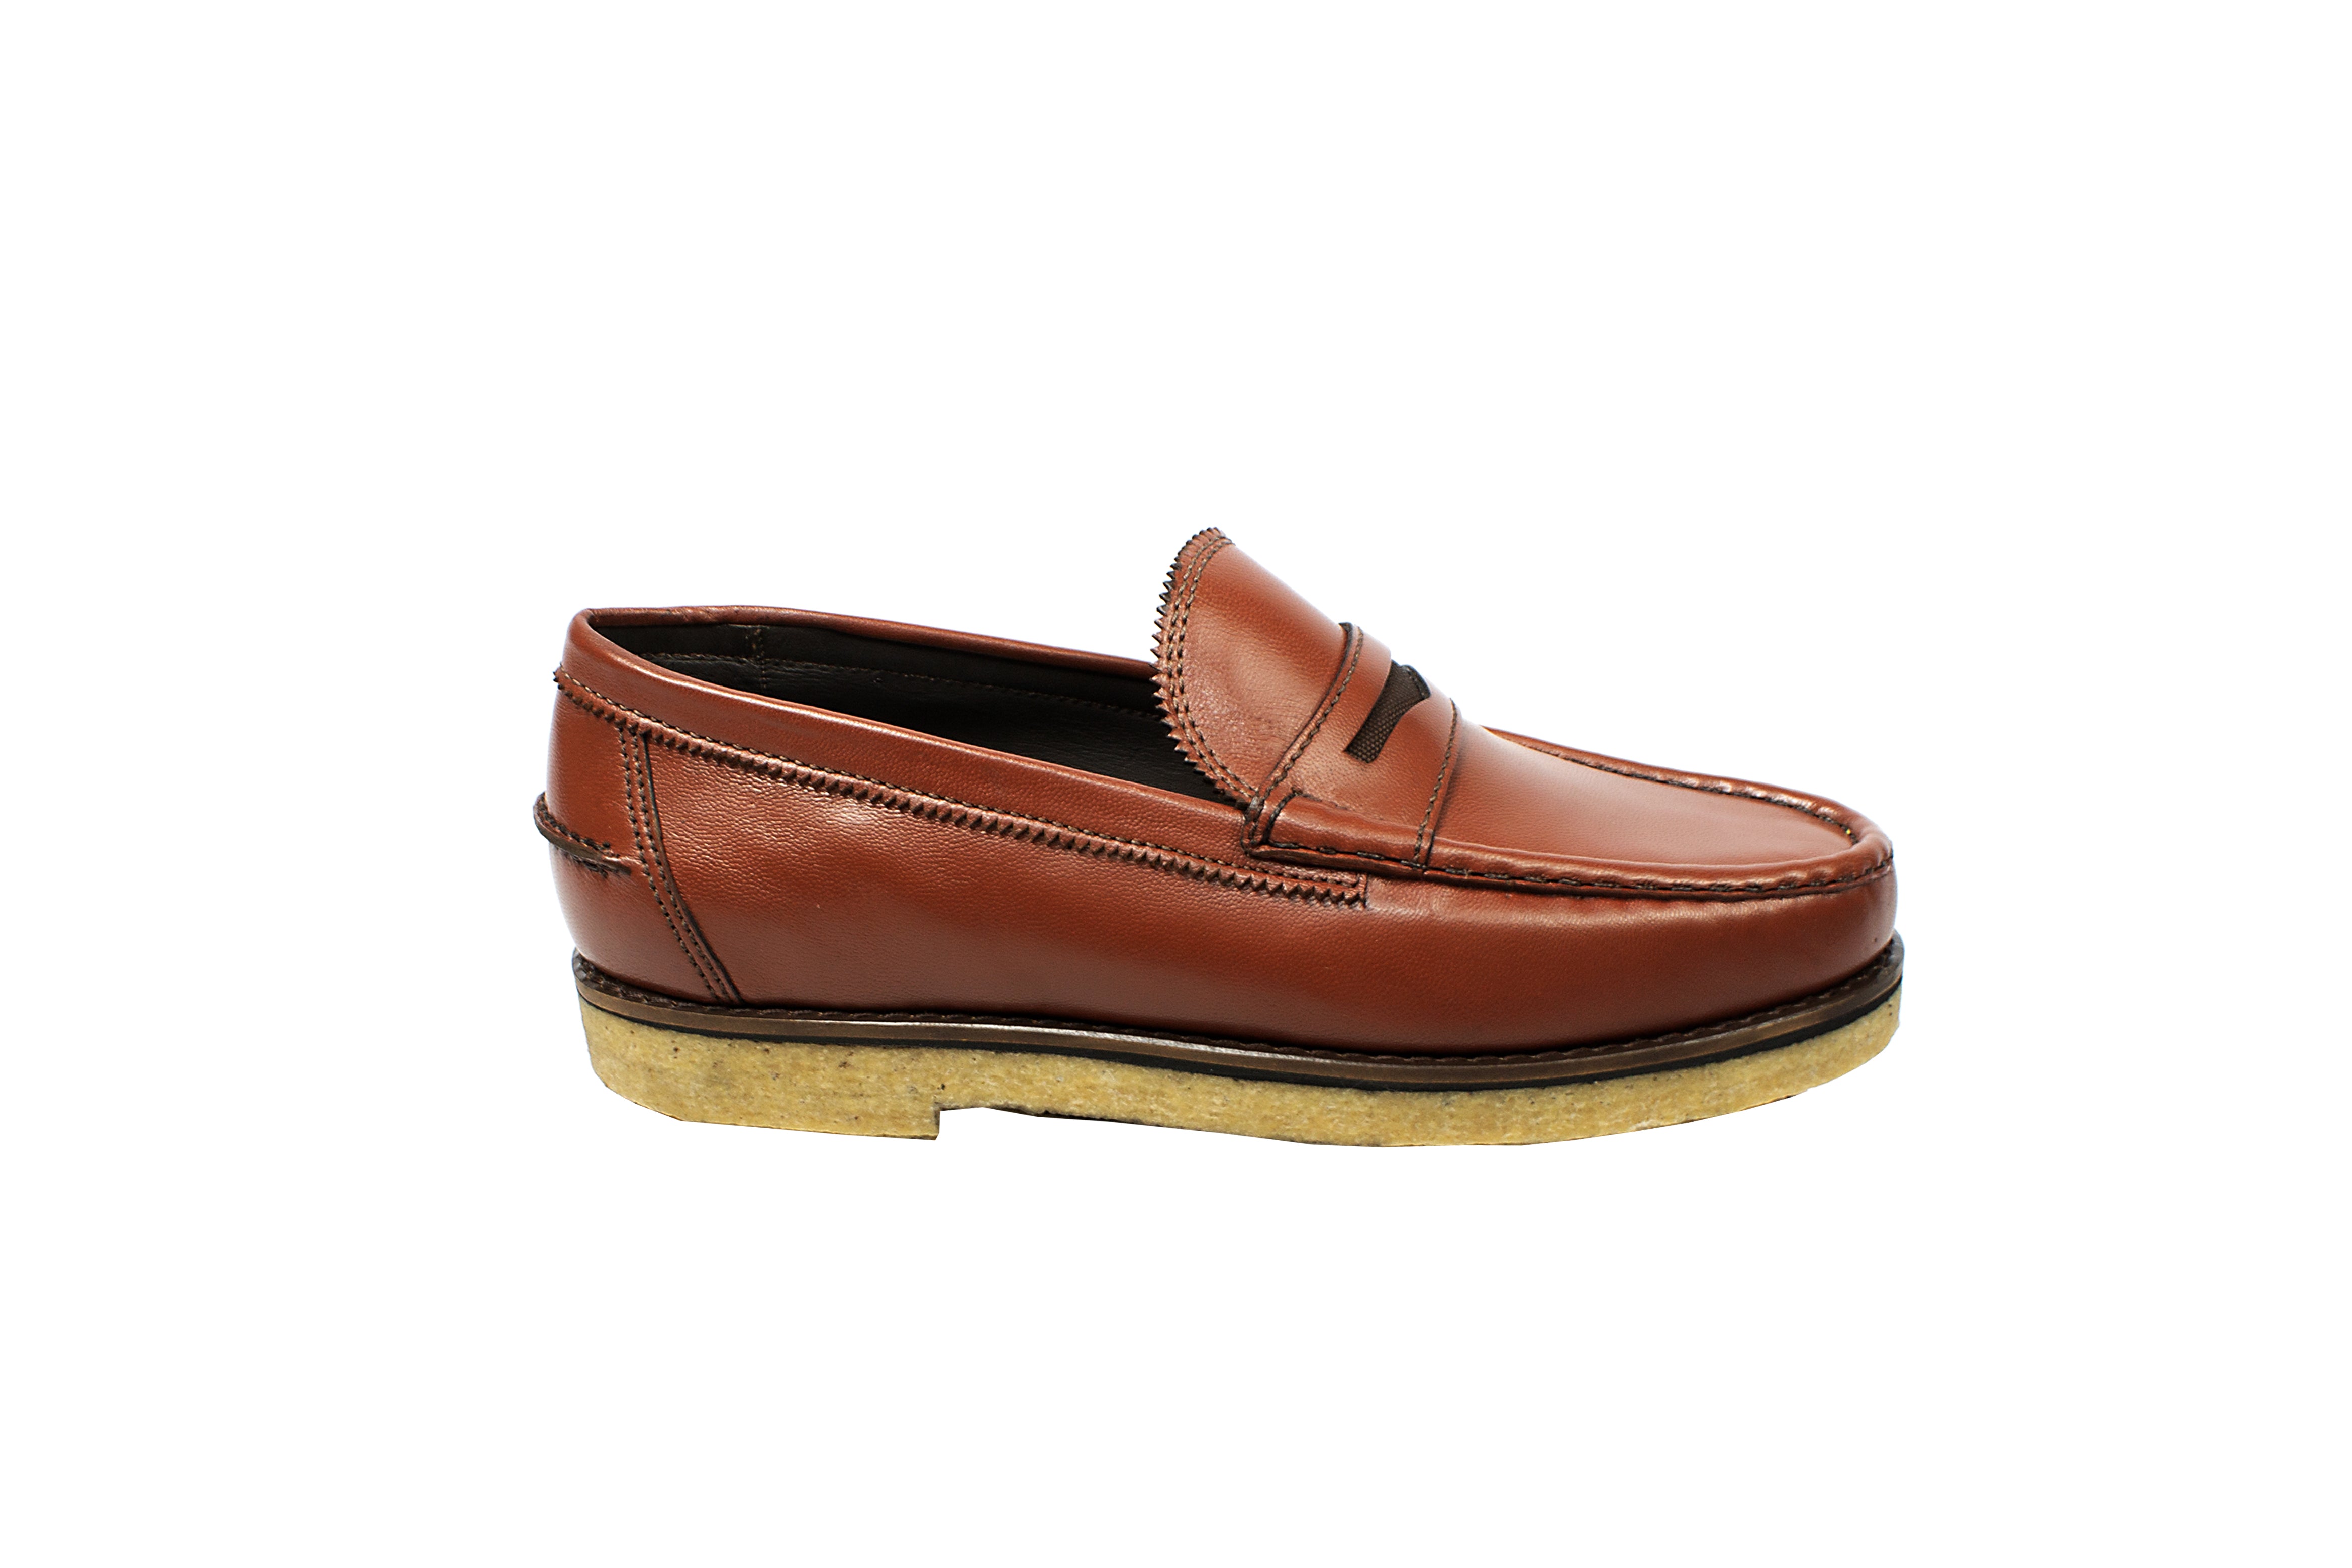 Classic Moccasin - Athos Natural Crepe Rubber Sole